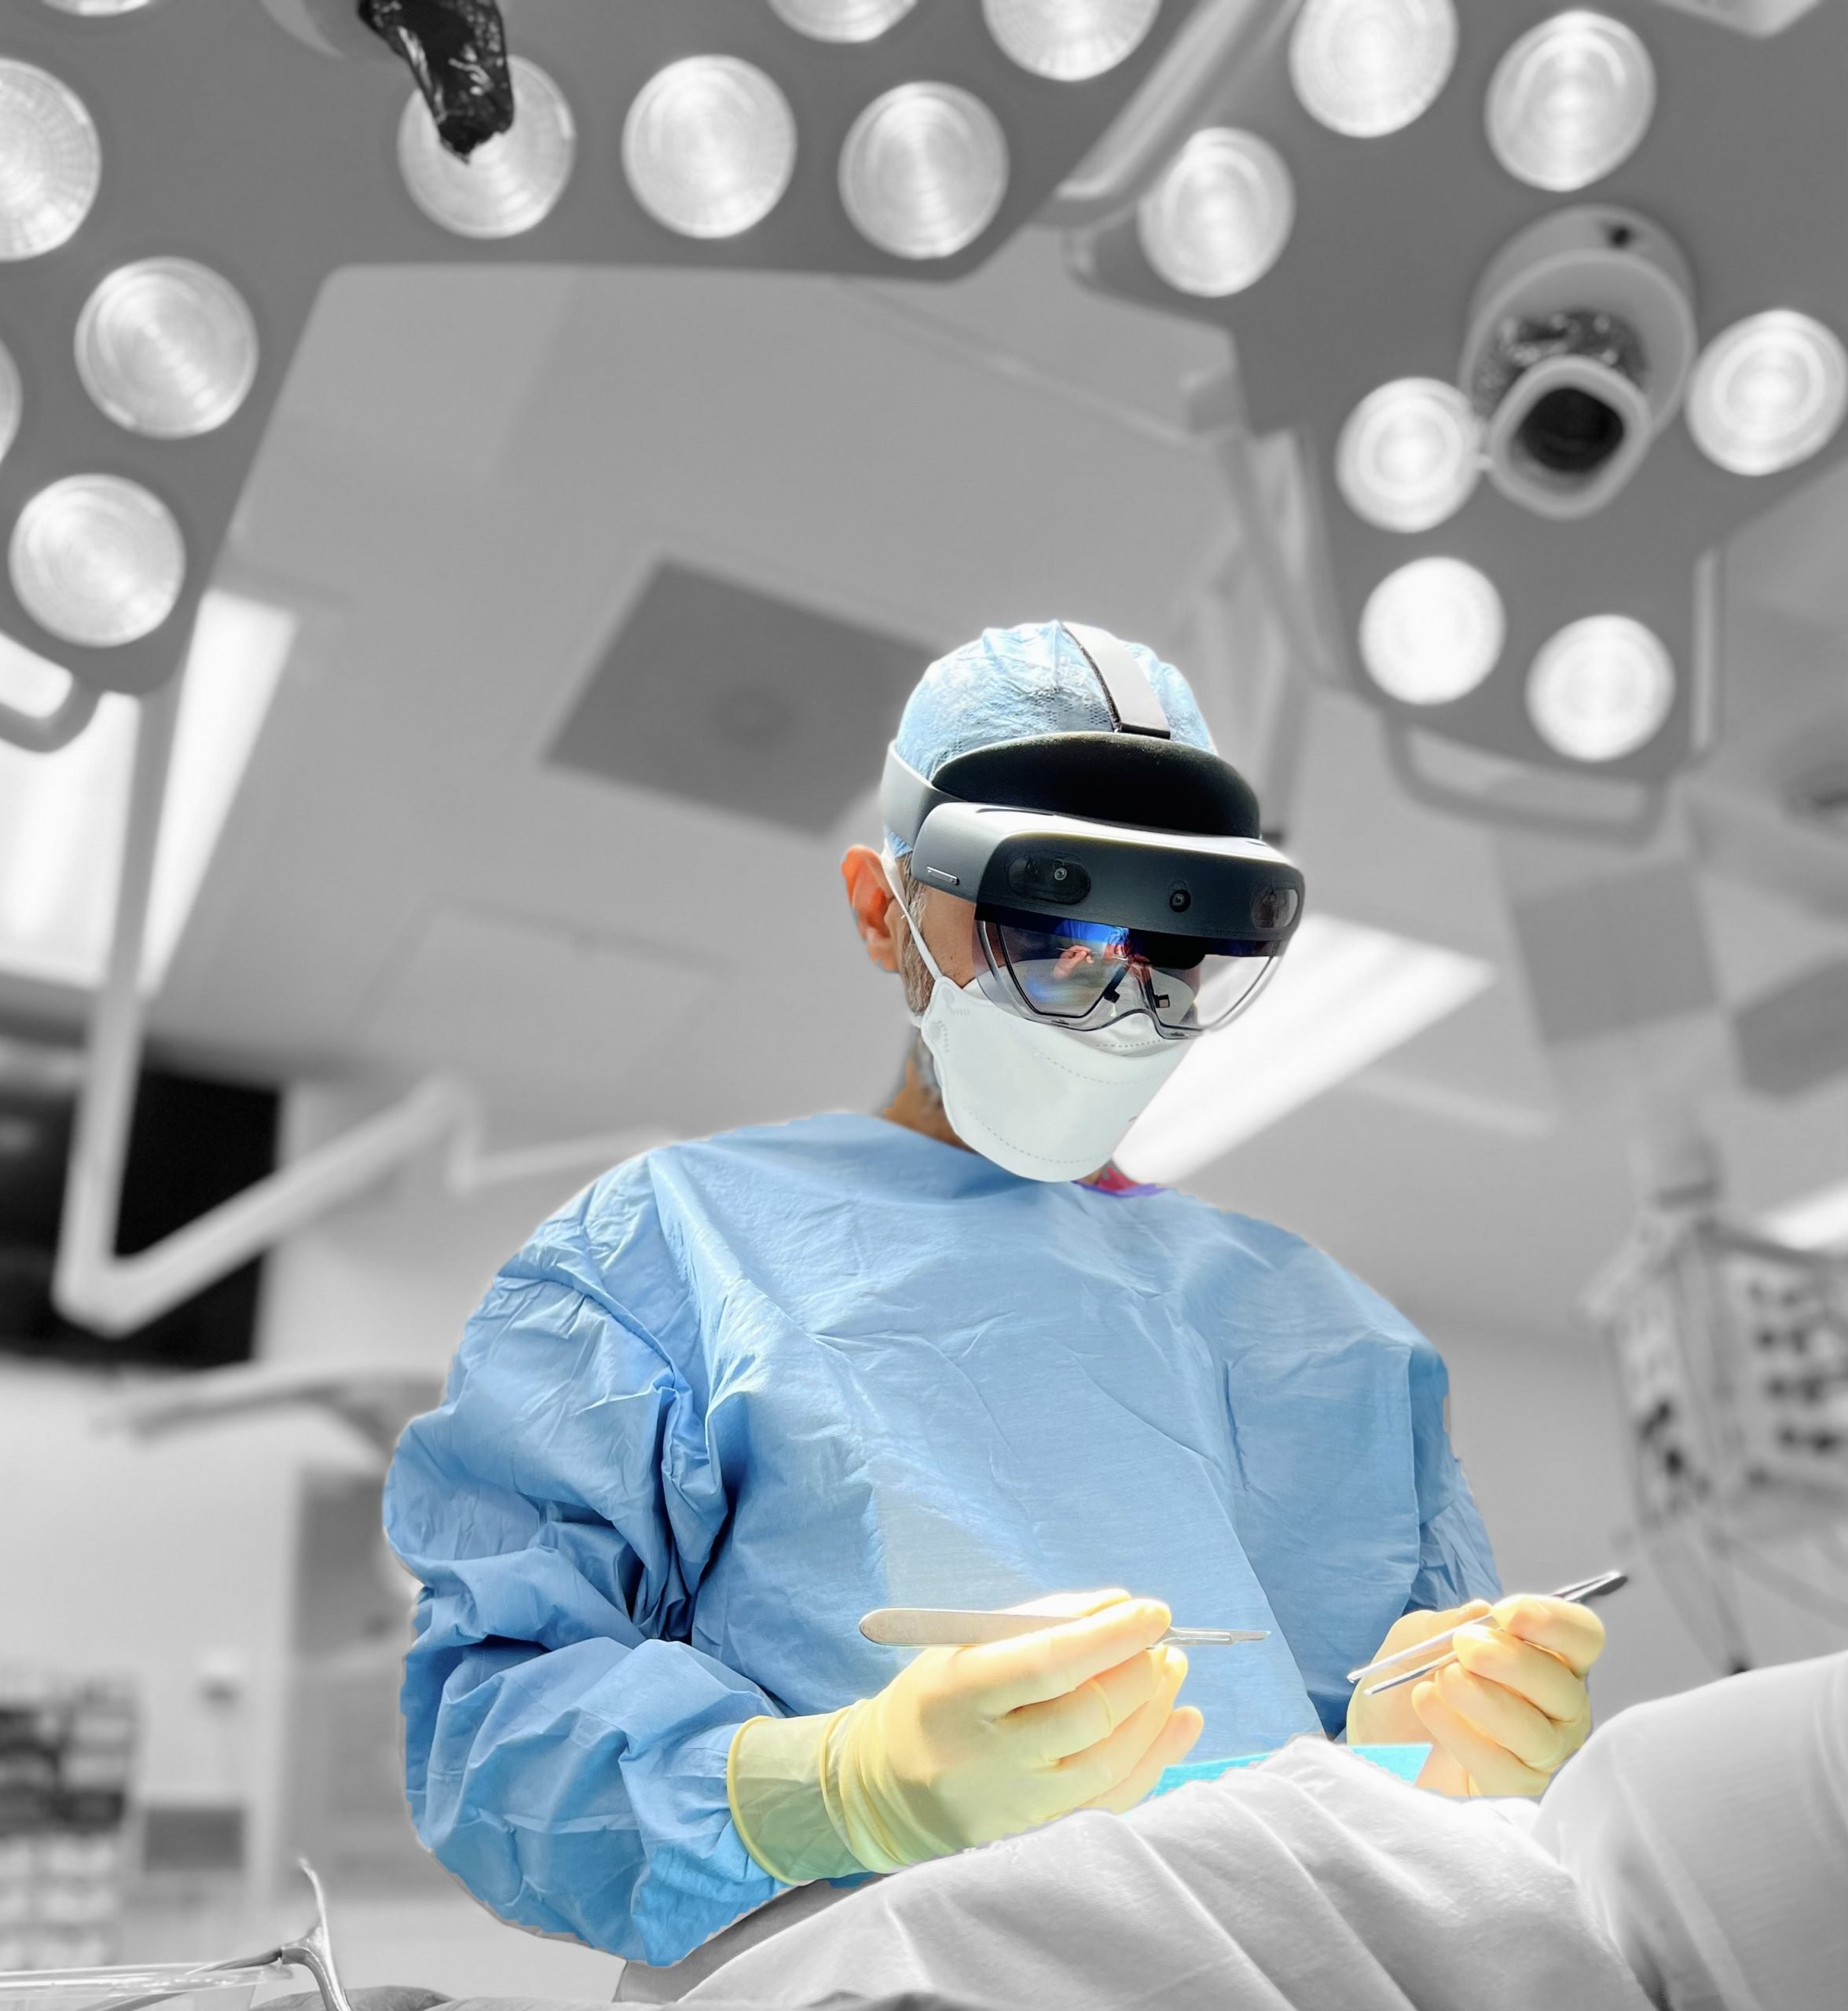 A first for Northwick Park, surgeons use augmented reality glasses in surgery